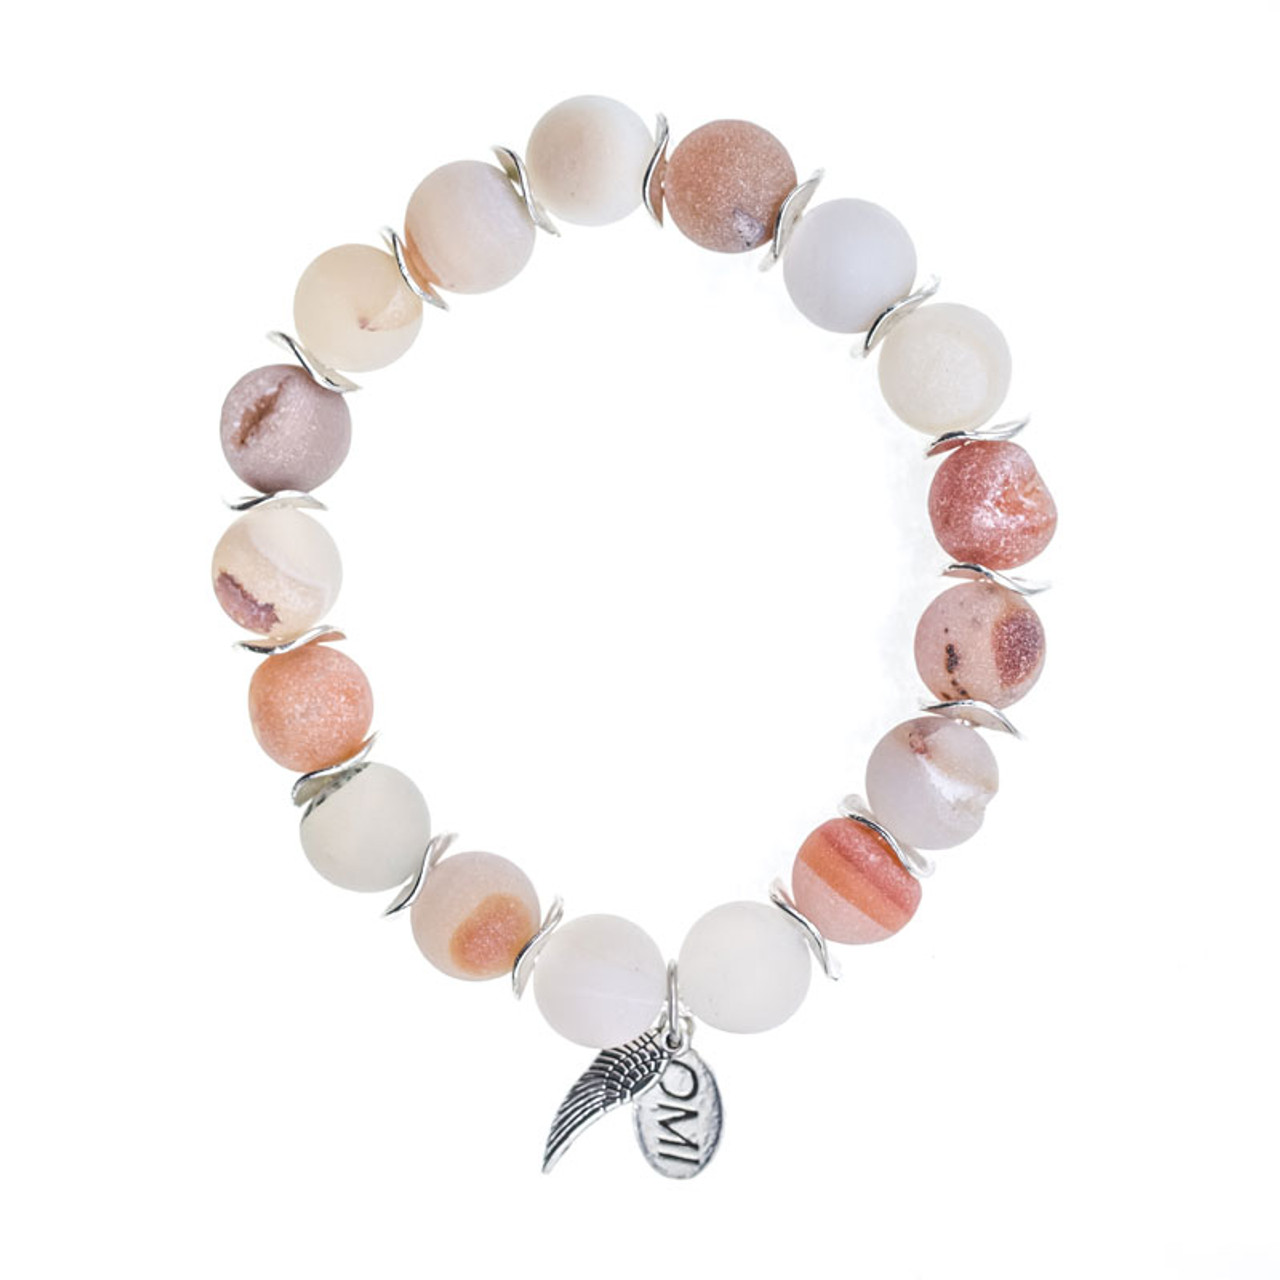 Blush Matte Druzy Stone Bead Bracelet with Gold Spacers - 10mm-Wholesale